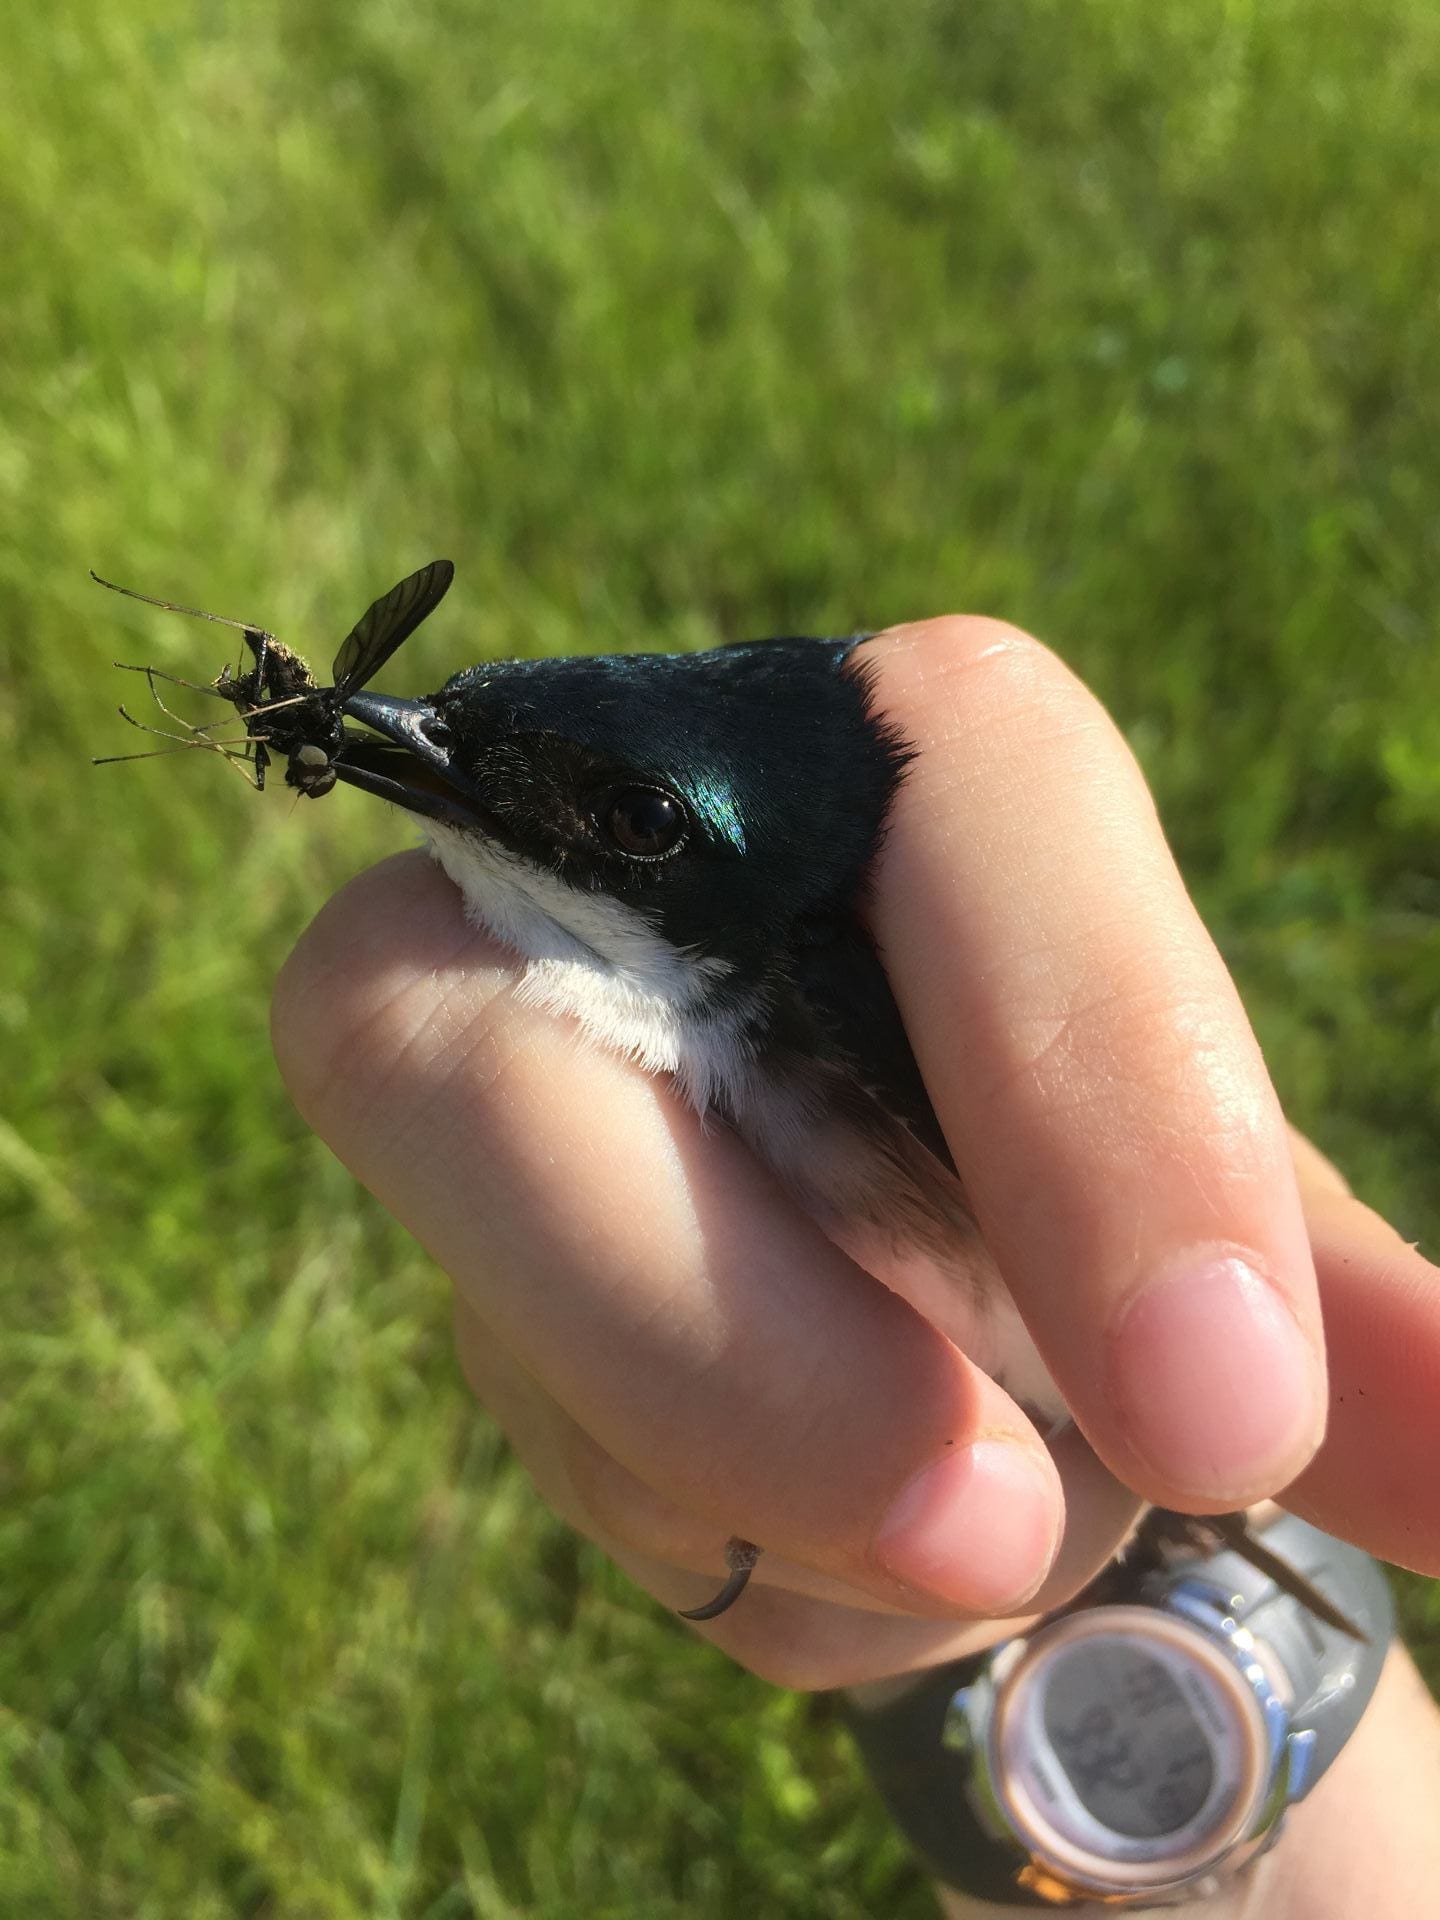 An adult bird is being held in a person’s hand. The bird’s head is nestled between the person’s index and middle fingers. The bird is holding a small, black insect with wings in its beak. The bird has white feathers on its abdomen and iridescent green and blue feathers on its head and back. 